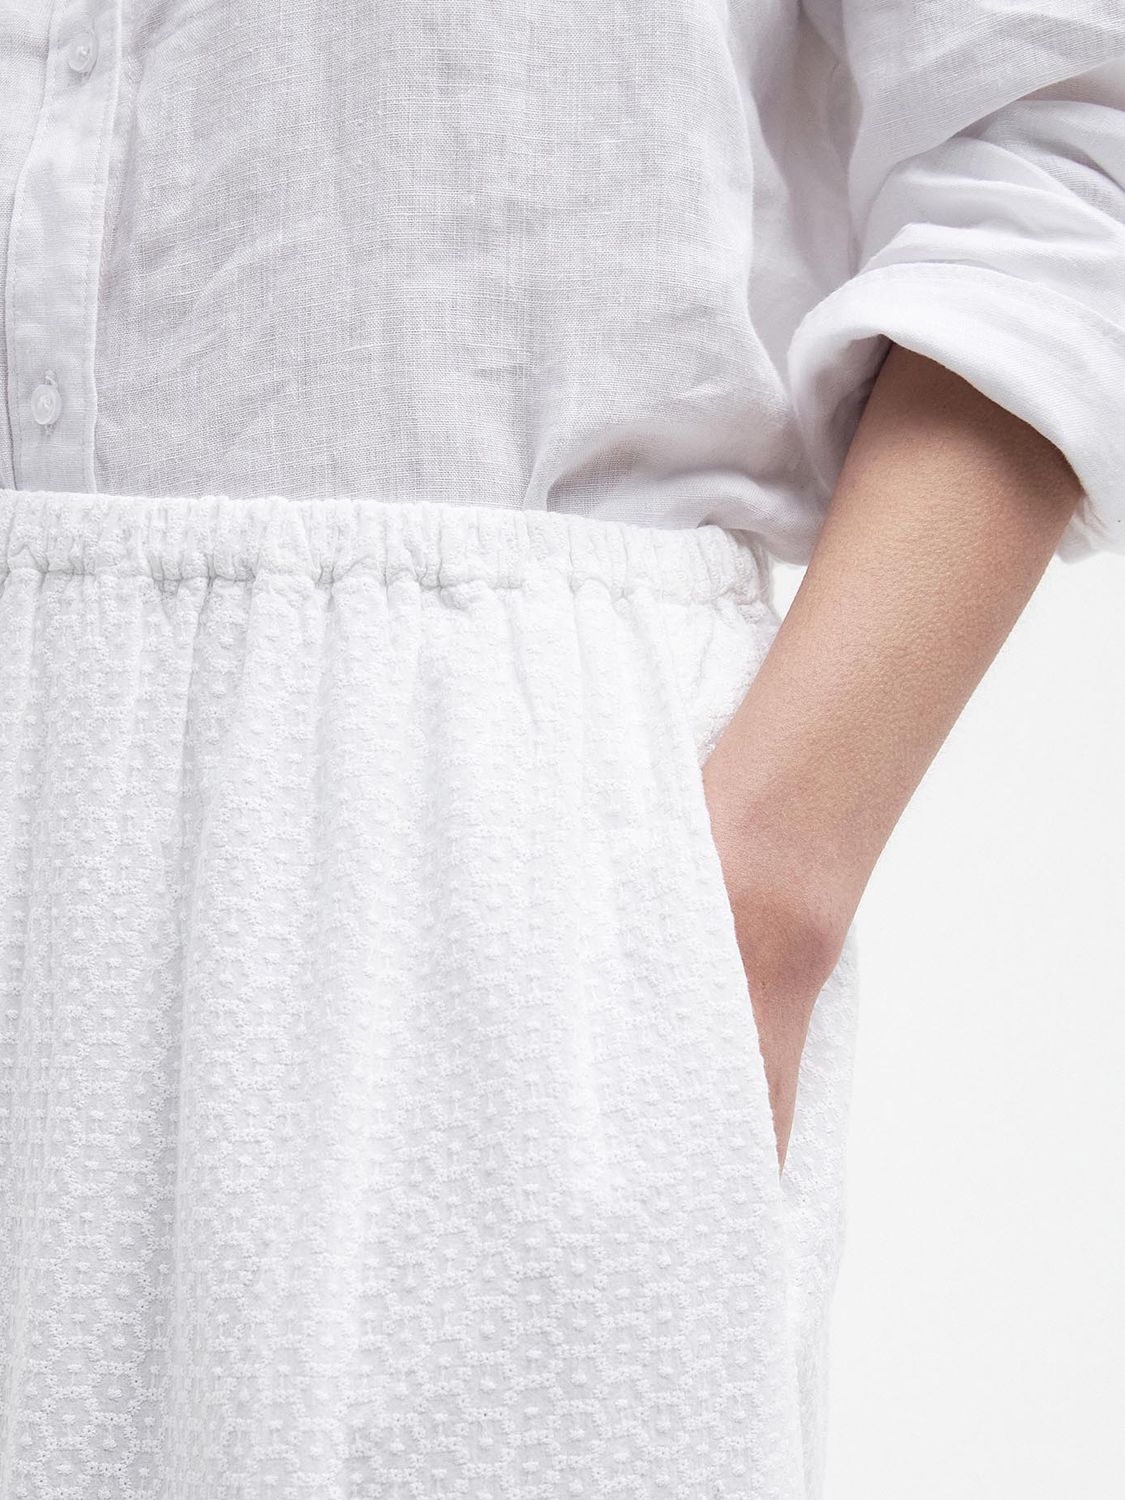 Buy Barbour Kelley Broderie Anglaise Maxi Skirt, White Online at johnlewis.com